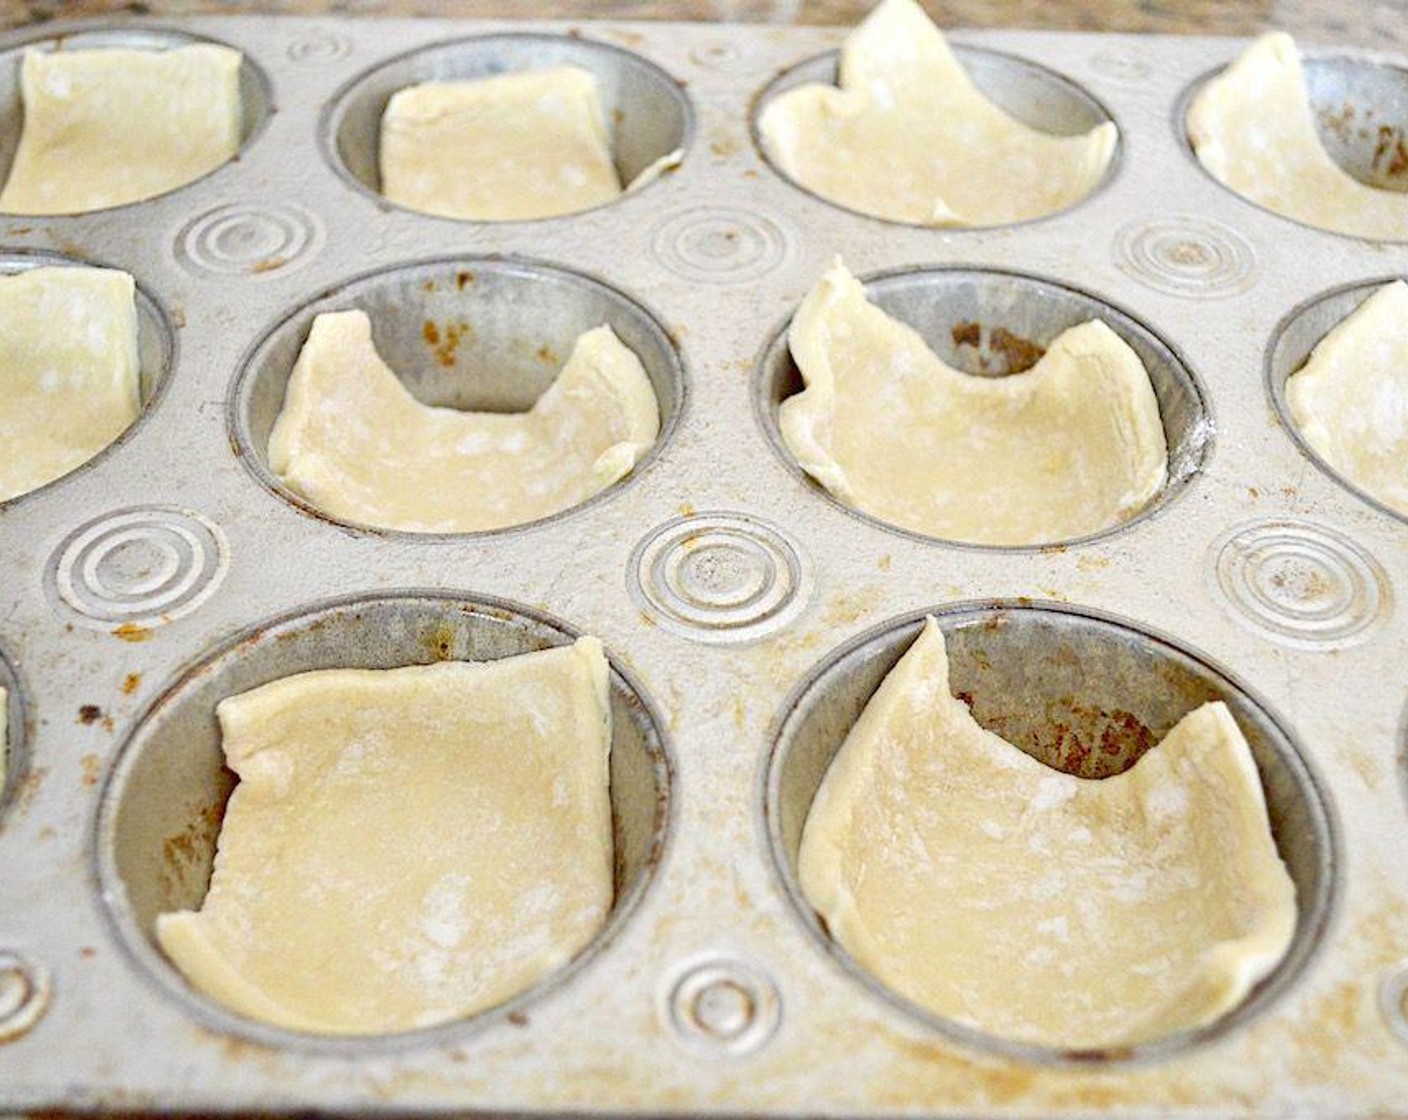 step 2 Take each sheet of Puff Pastry (2 sheets) and cut it into 12 squares. Do this by cutting along the fold seams to cut the sheet into thirds, then cut each third into 4 equal squares. Press each square into a muffin well to fill both tins.